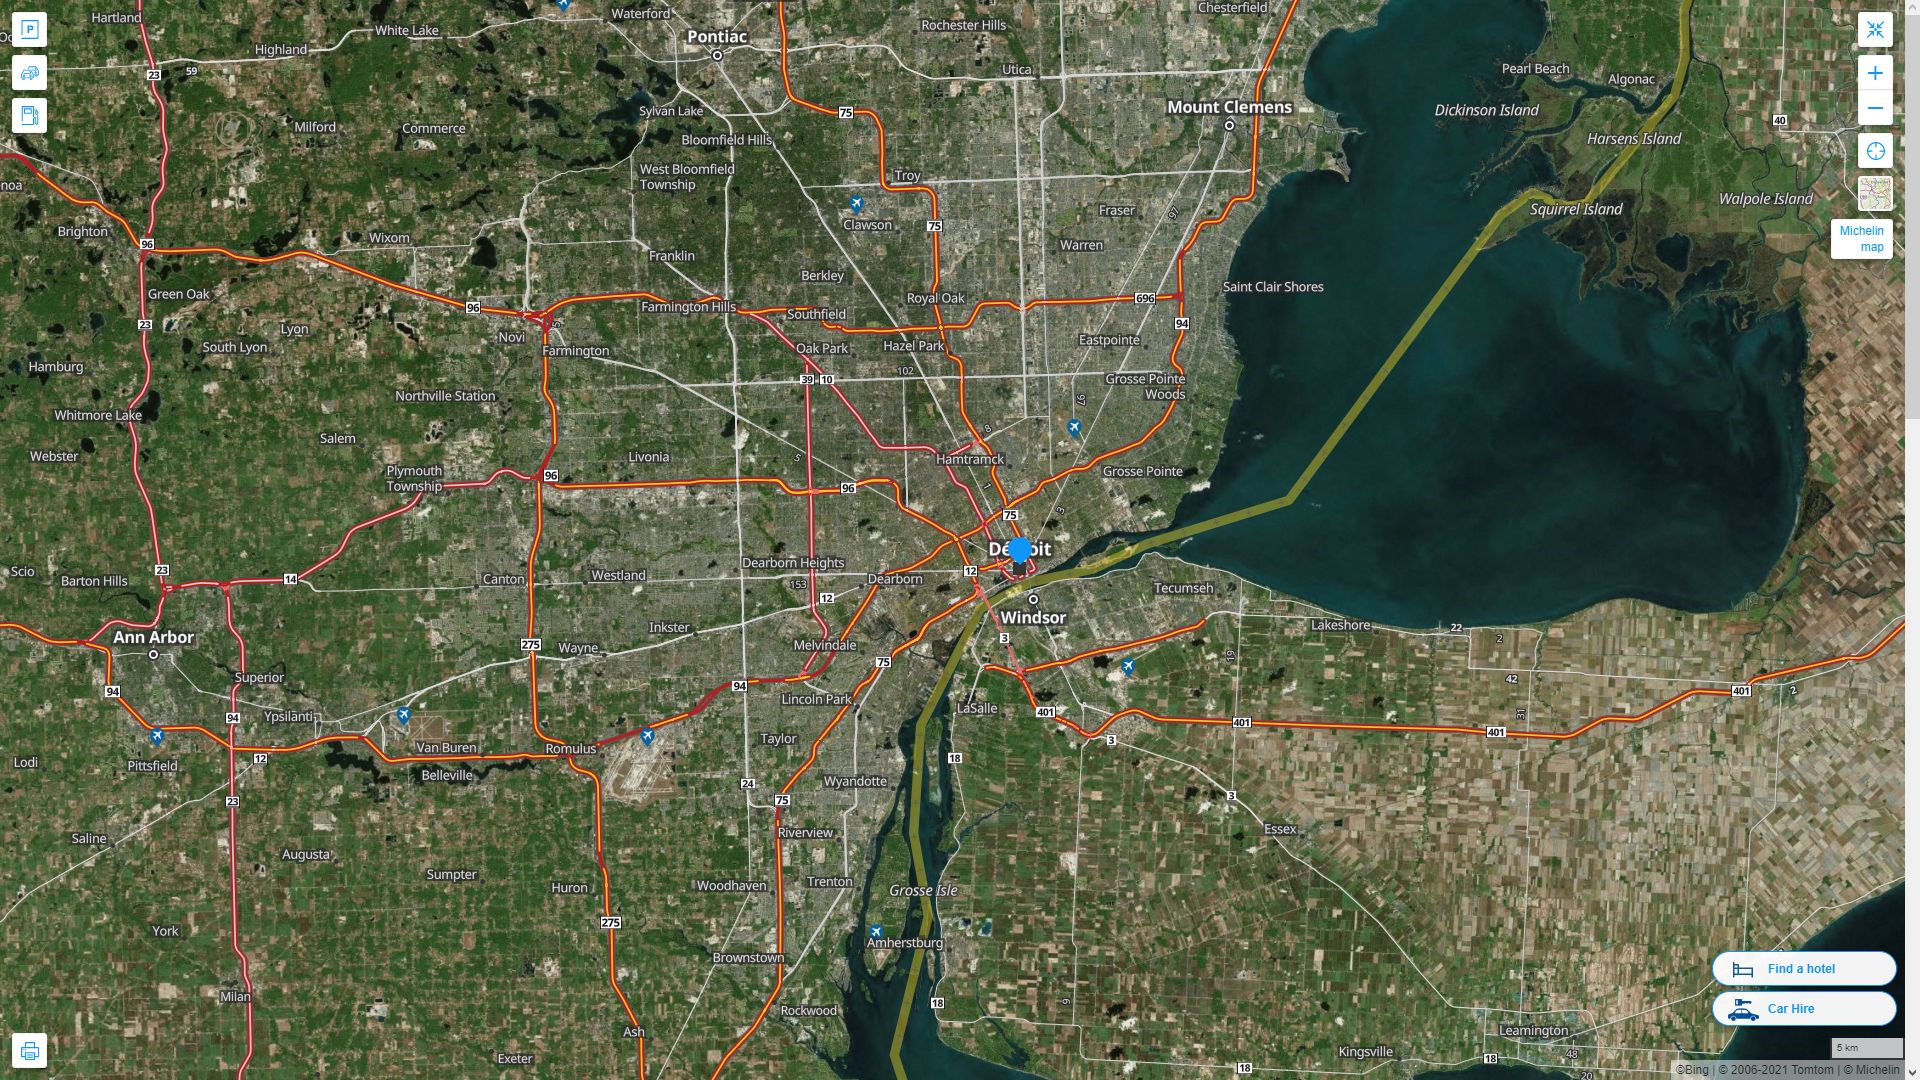 Detroit Michigan Highway and Road Map with Satellite View